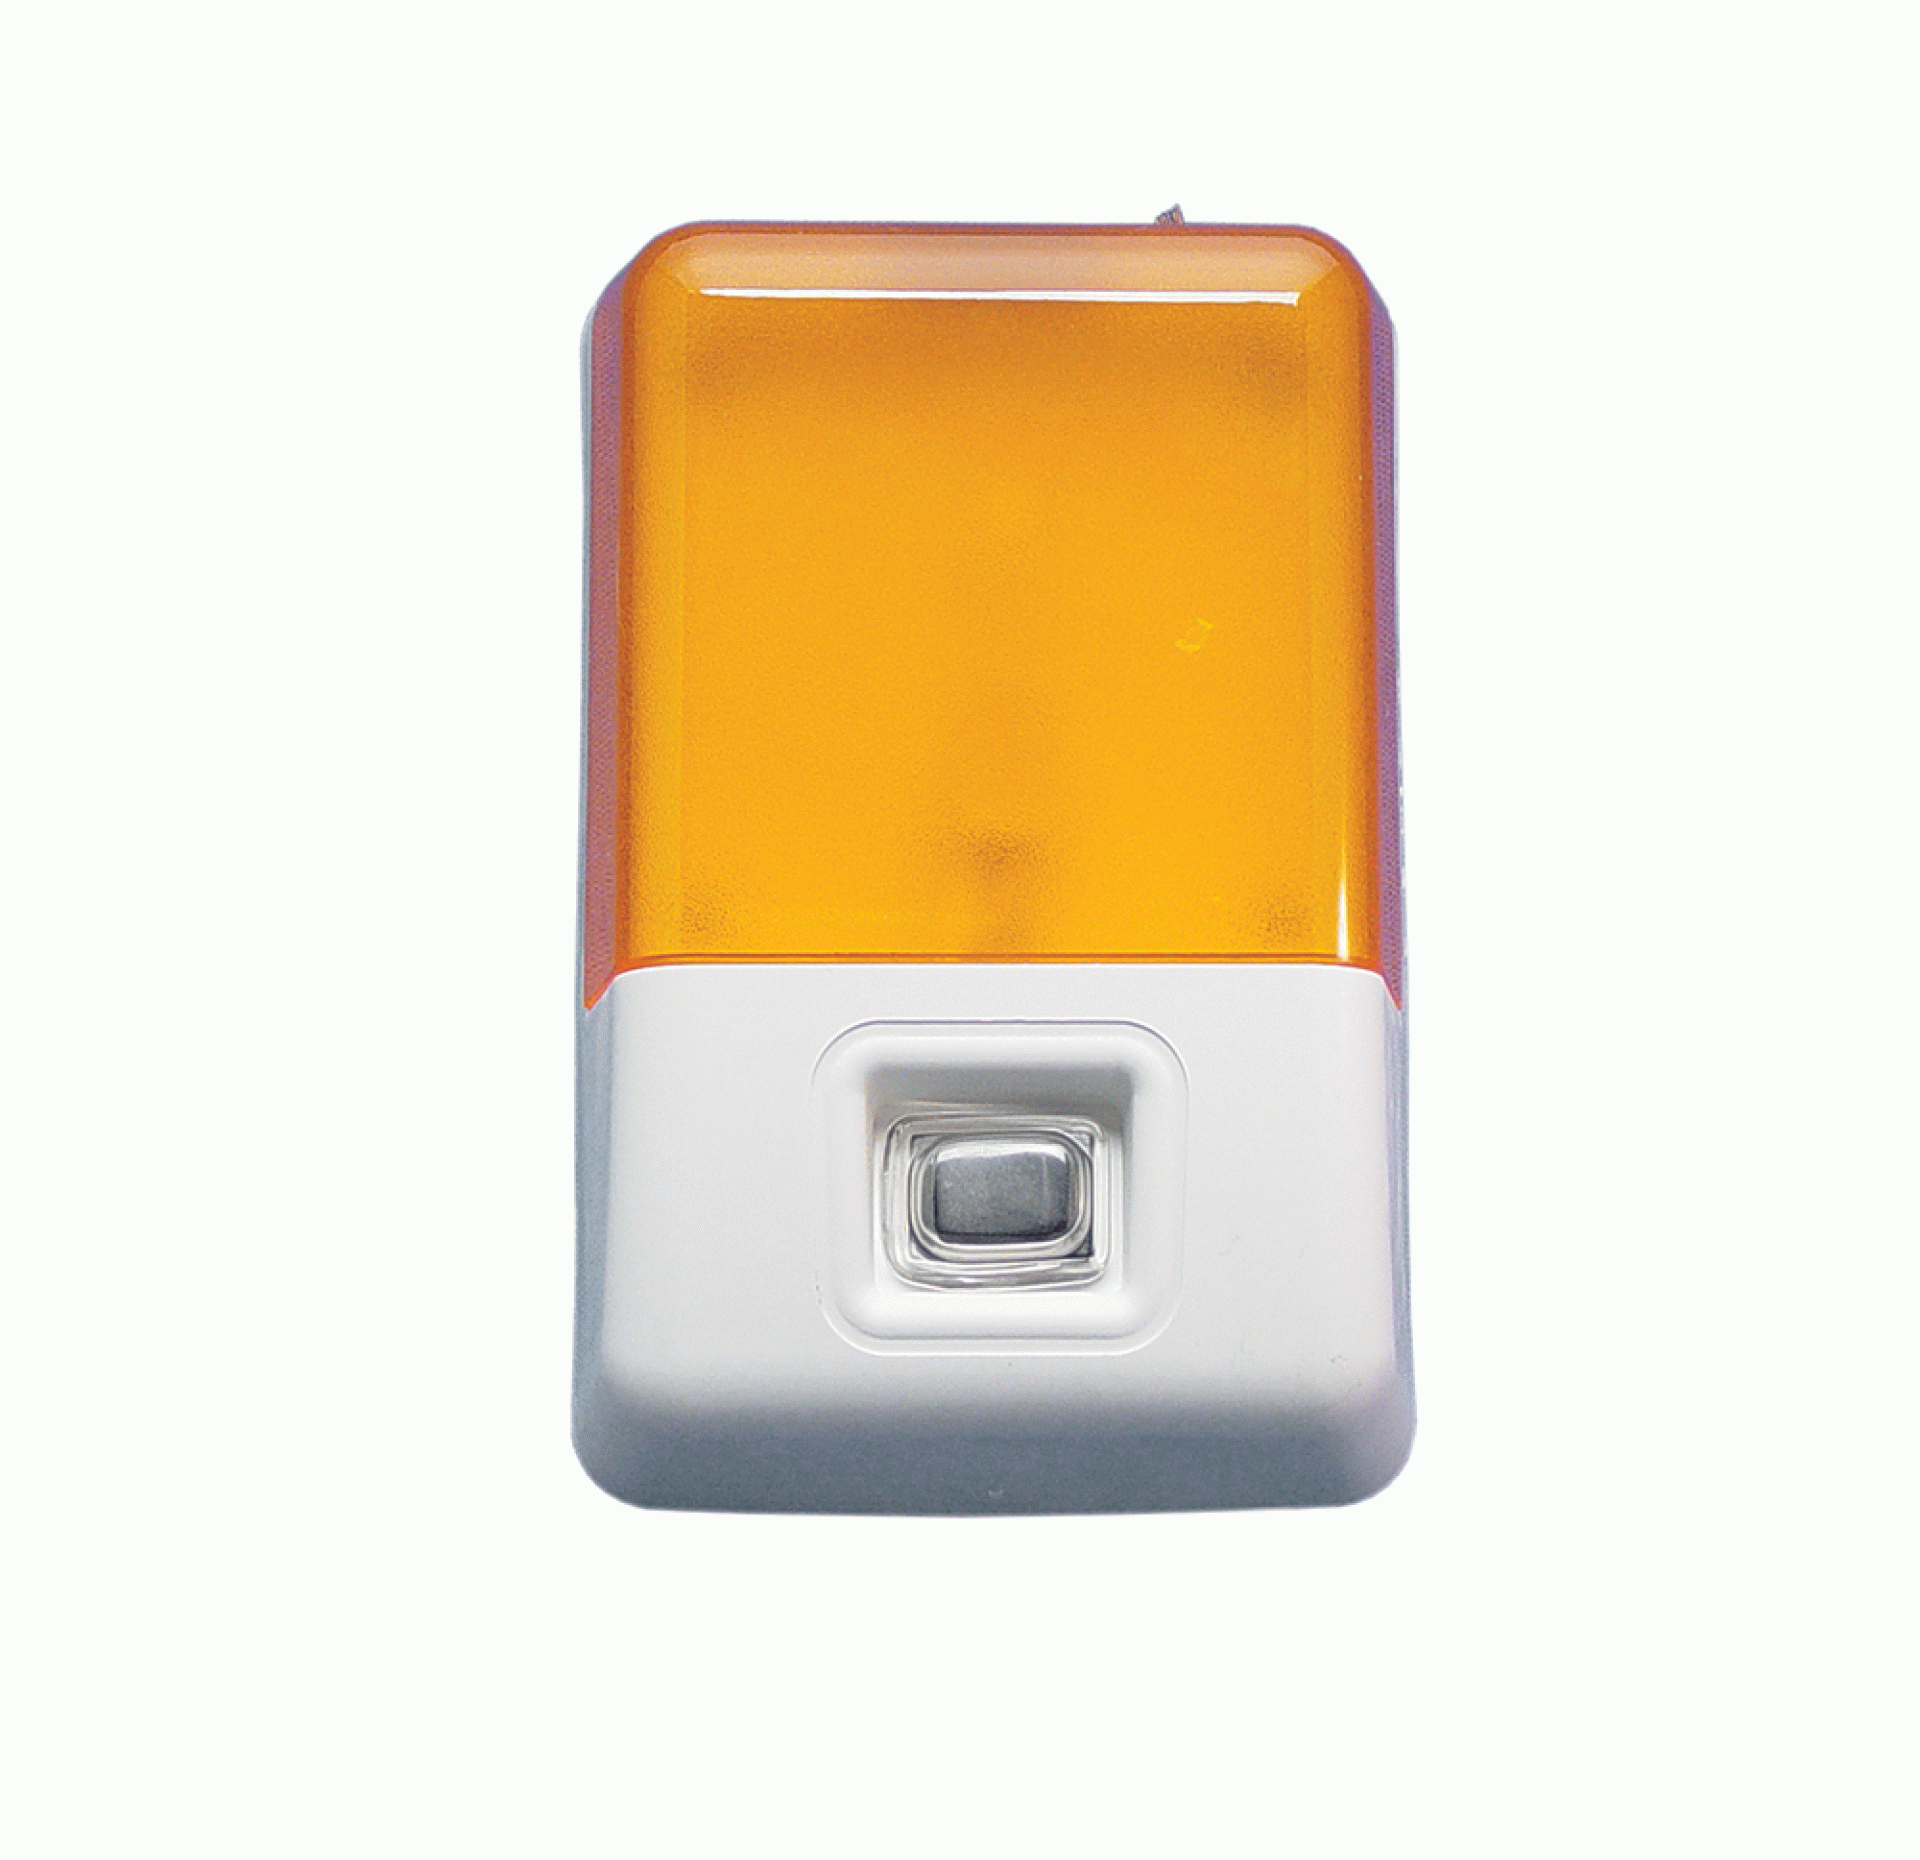 FASTENERS UNLIMITED | CMD-007-40SAC | PORCH LIGHT 12 V W/ SWITCH AMBER LENS